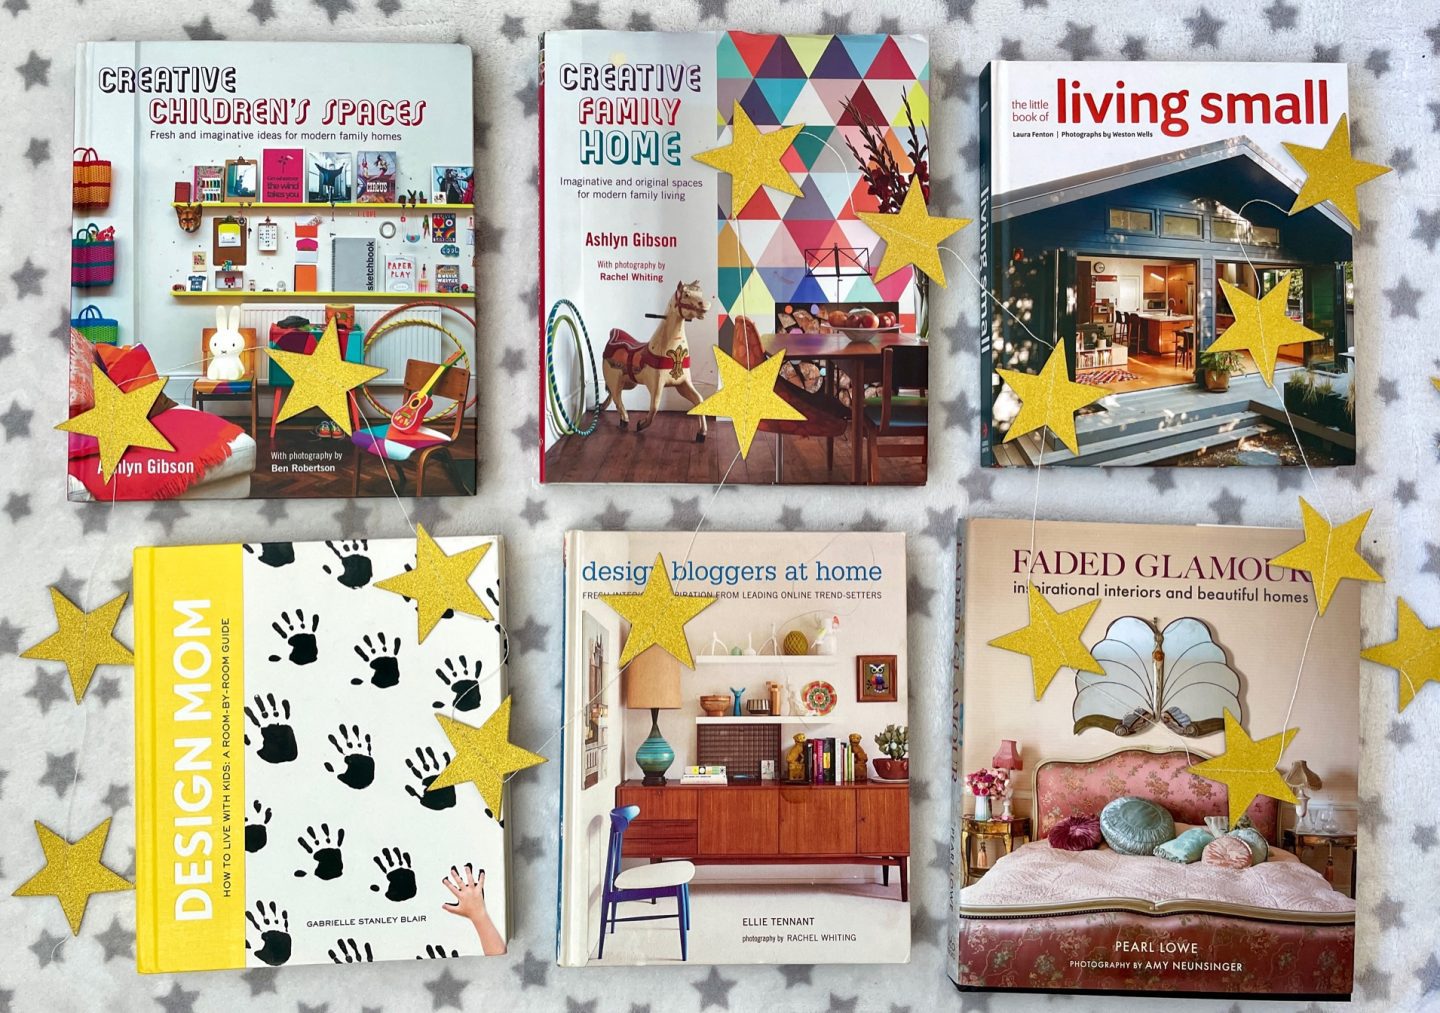 The best interior design books for family homes and families